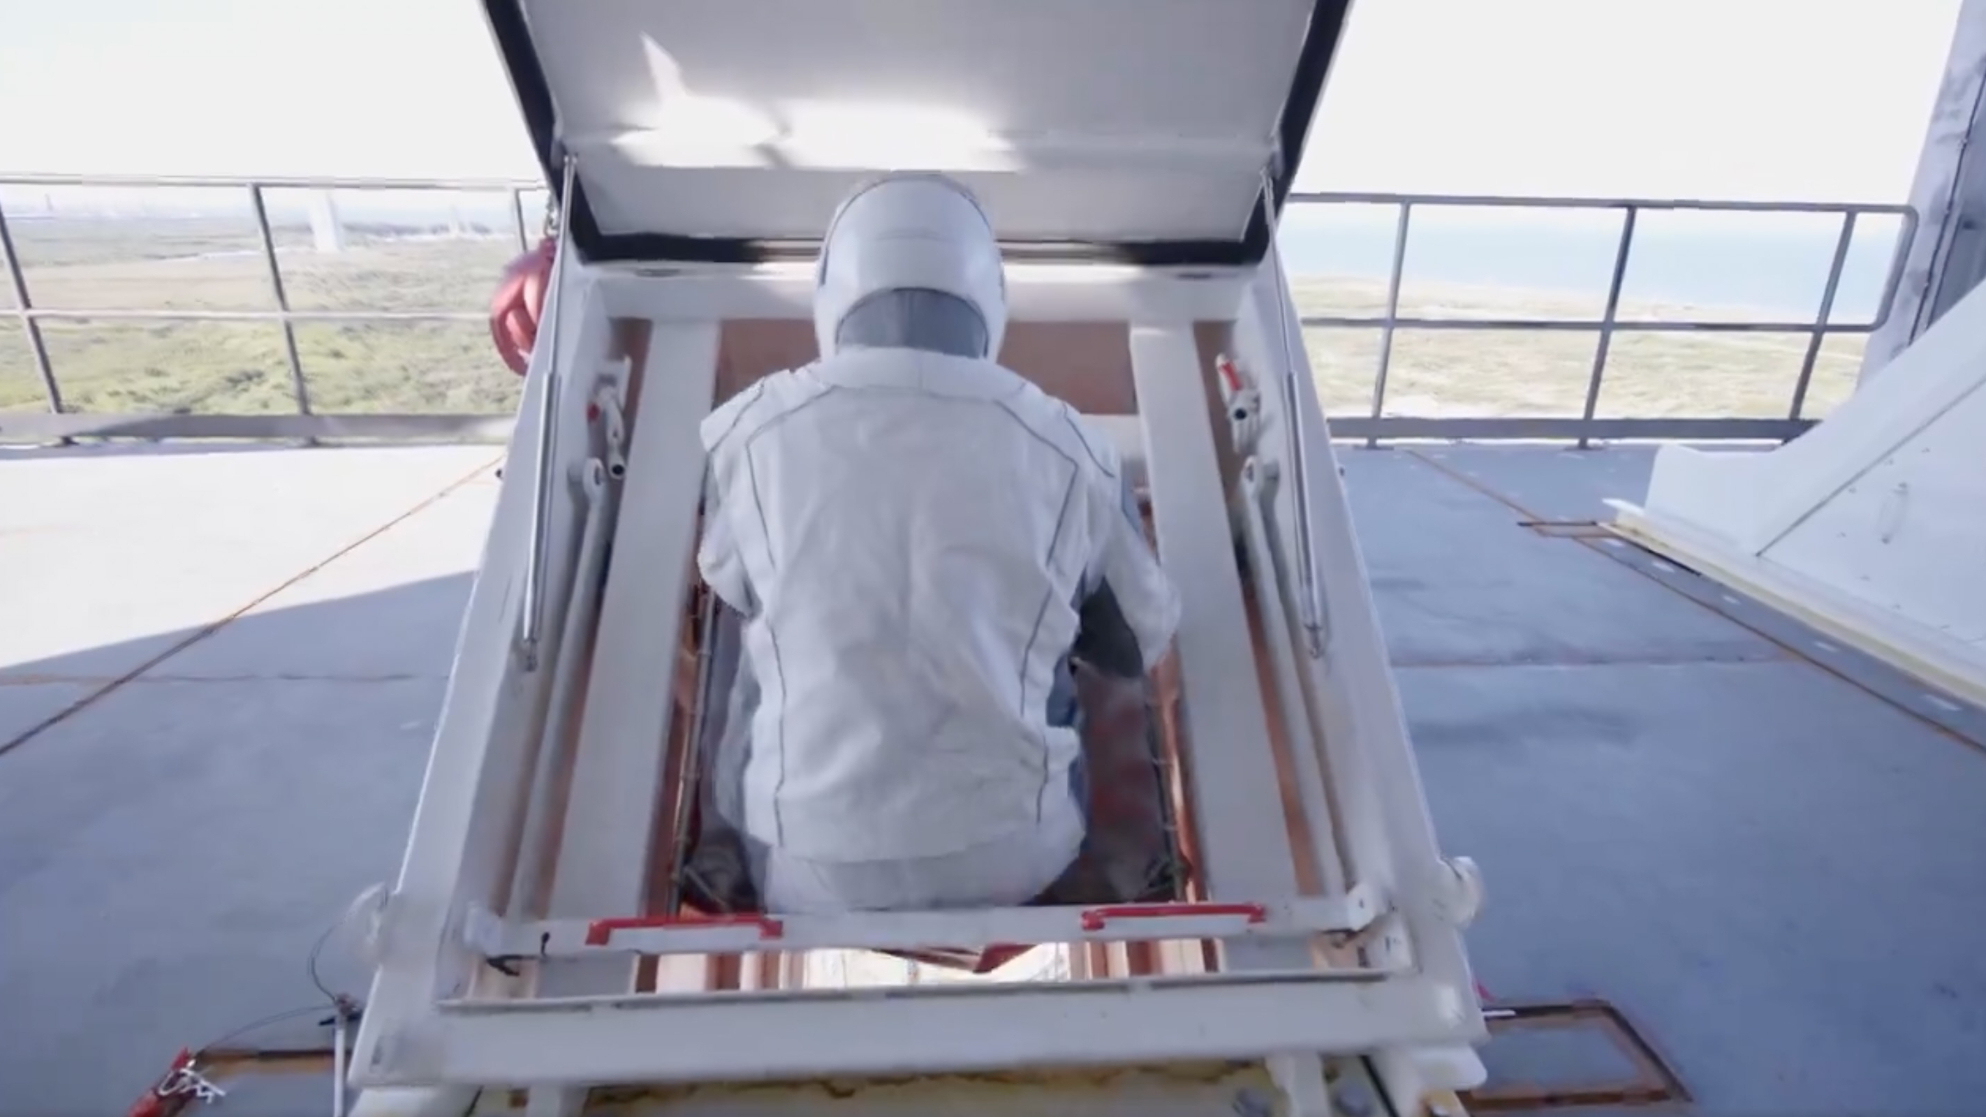 Whee! Zip down from the launch tower in SpaceXs new emergency-escape slide (video)